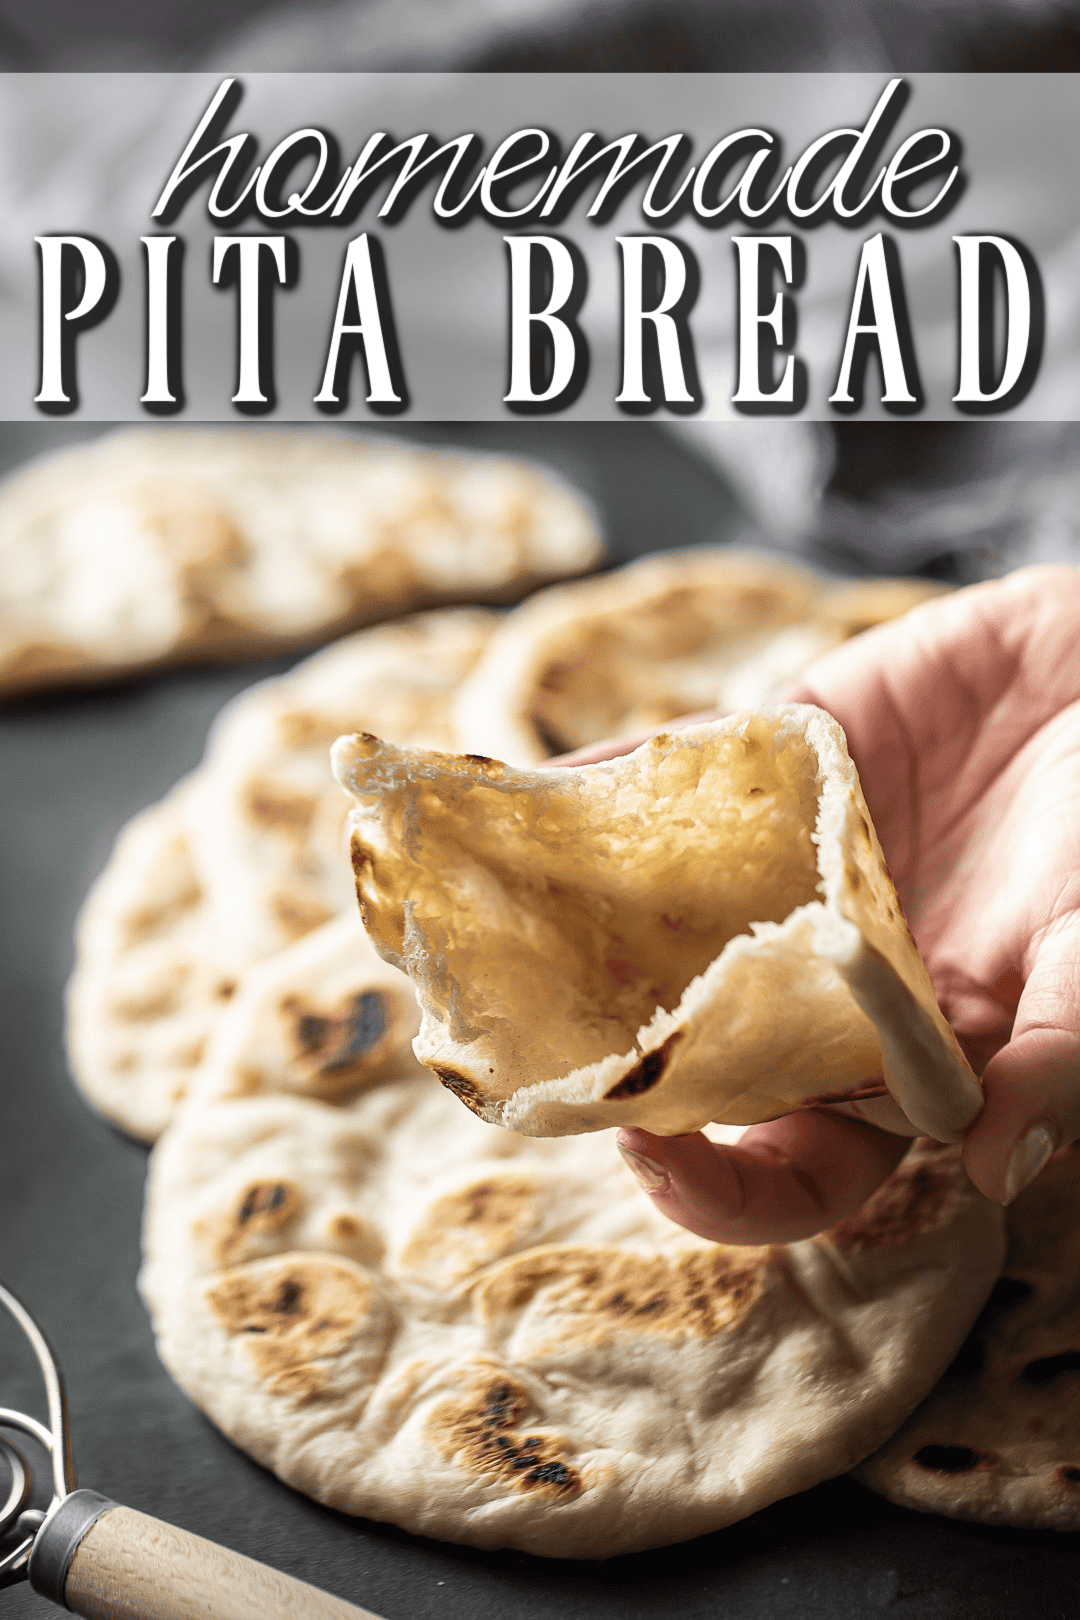 Pita bread halved and opened to reveal the pocket inside.